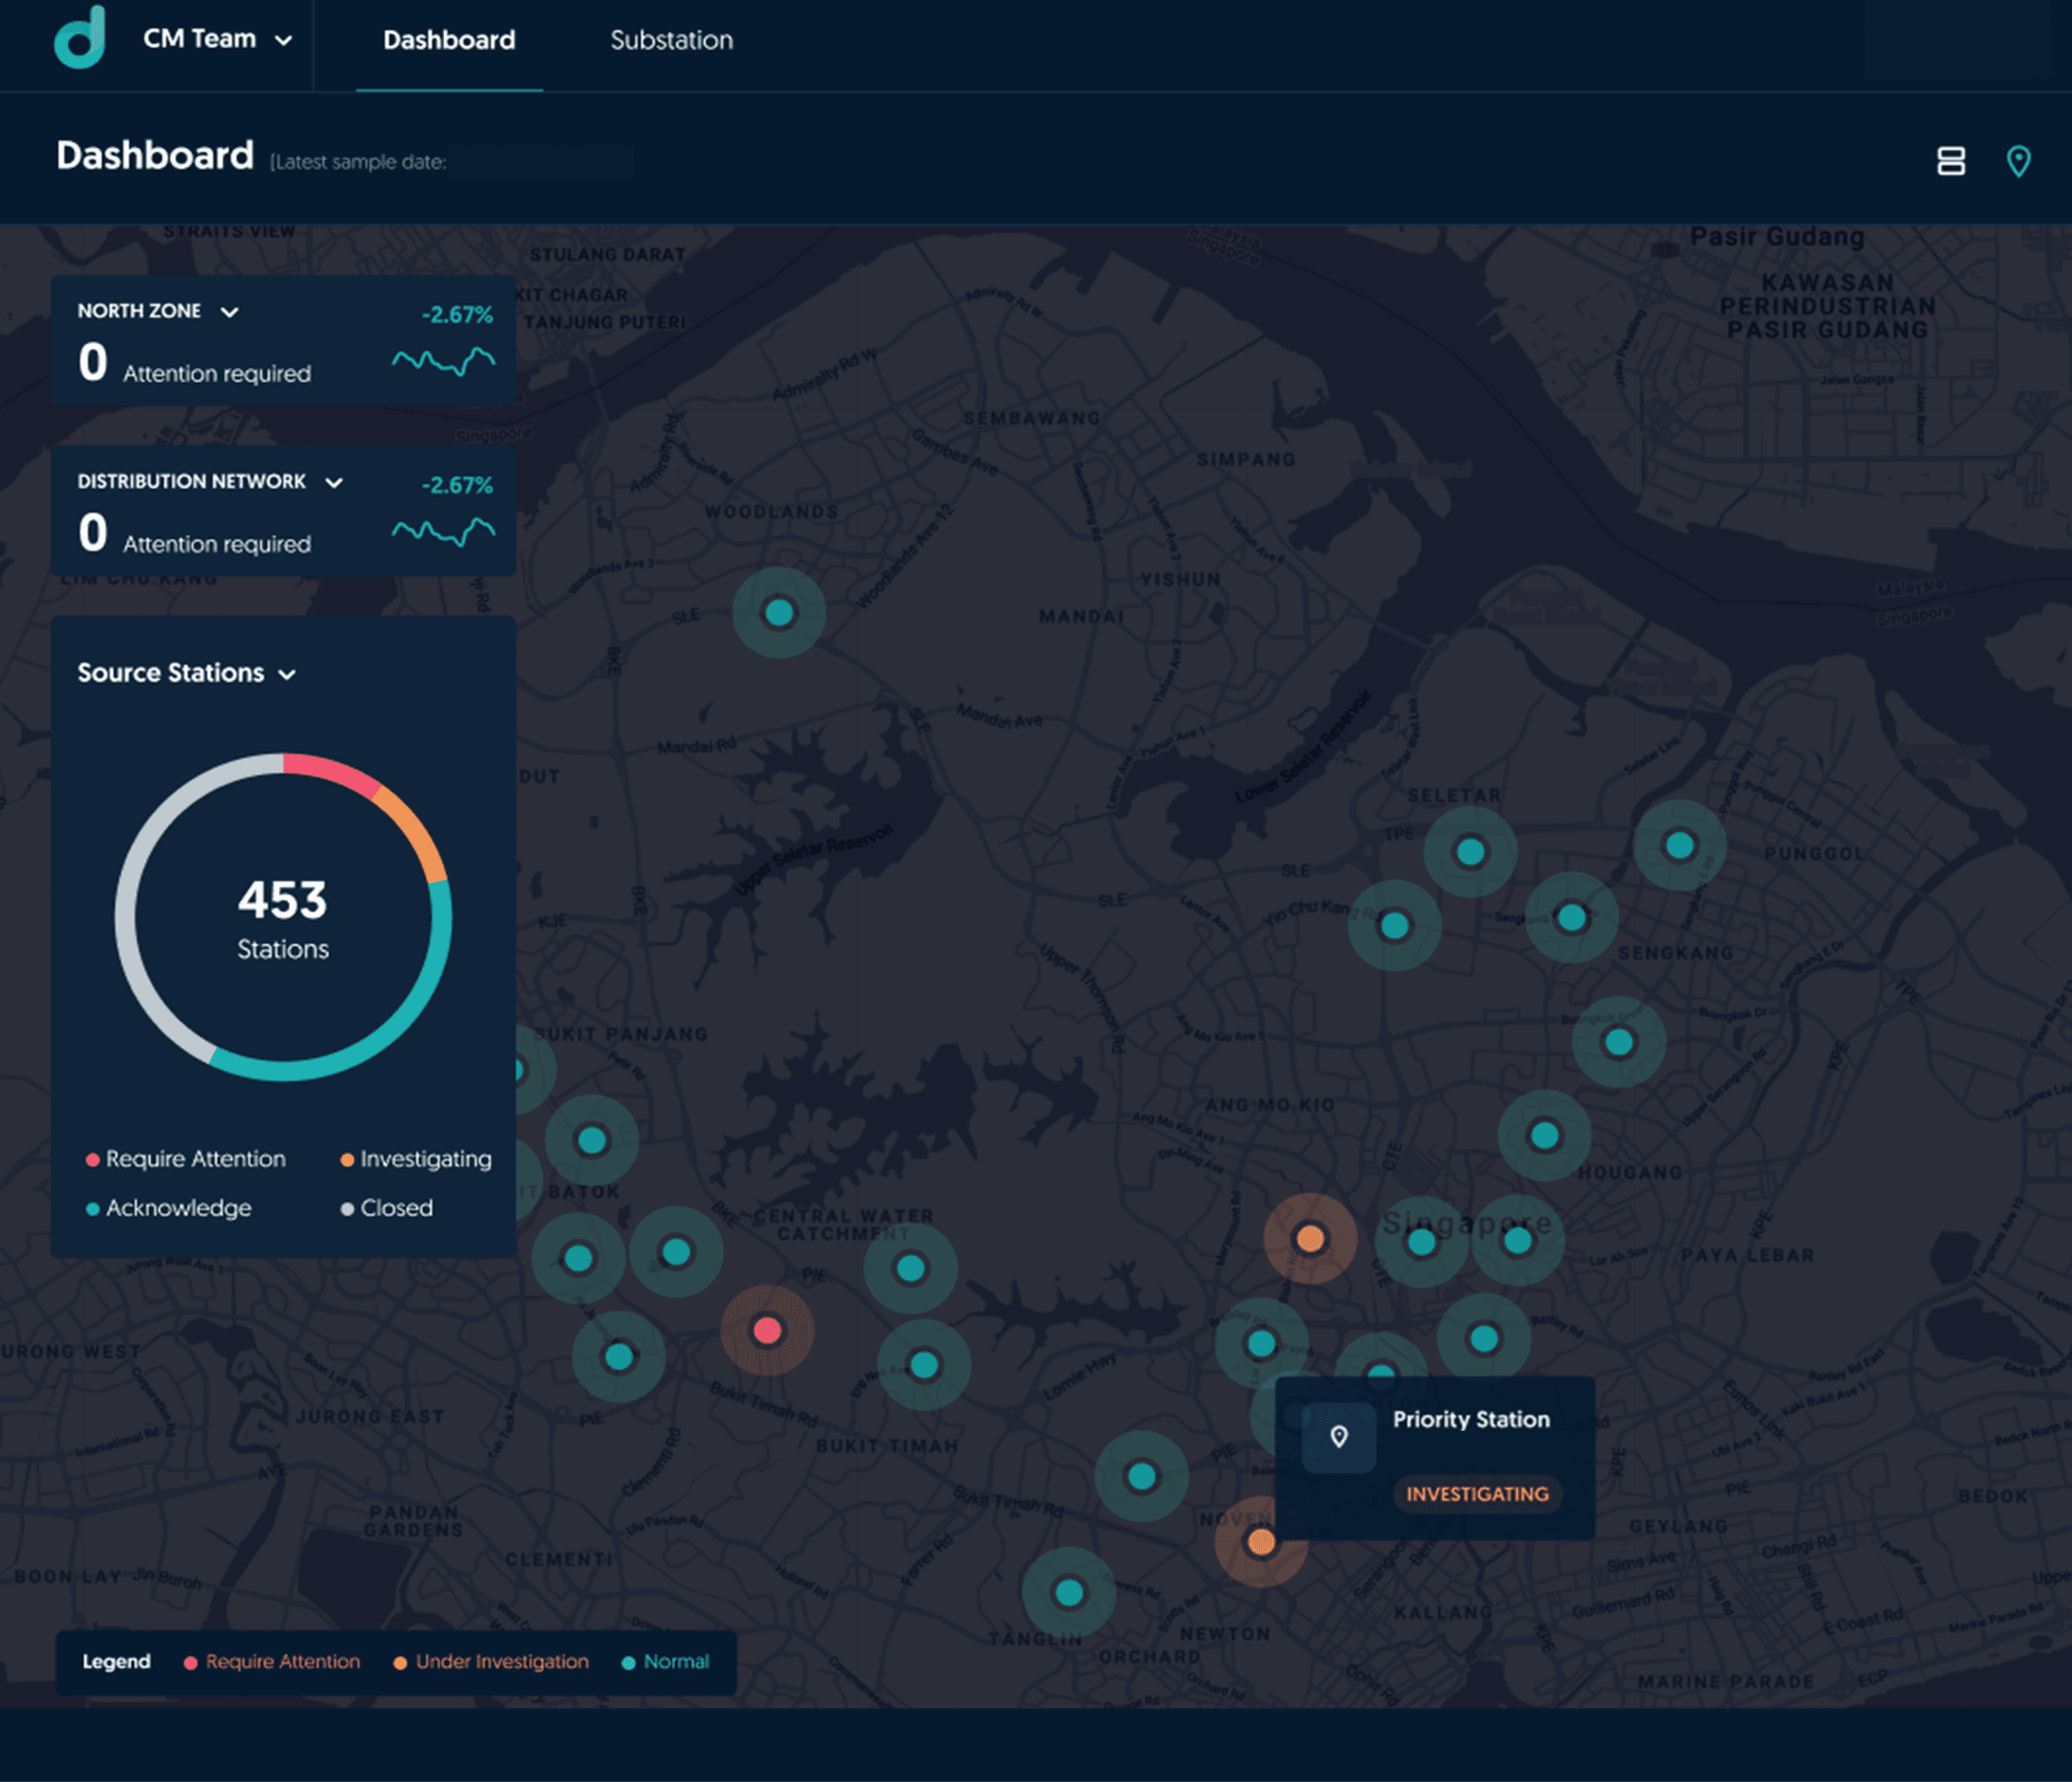 A dashboard providing an overview of Asset Health and Criticality Index for the Distribution Network.